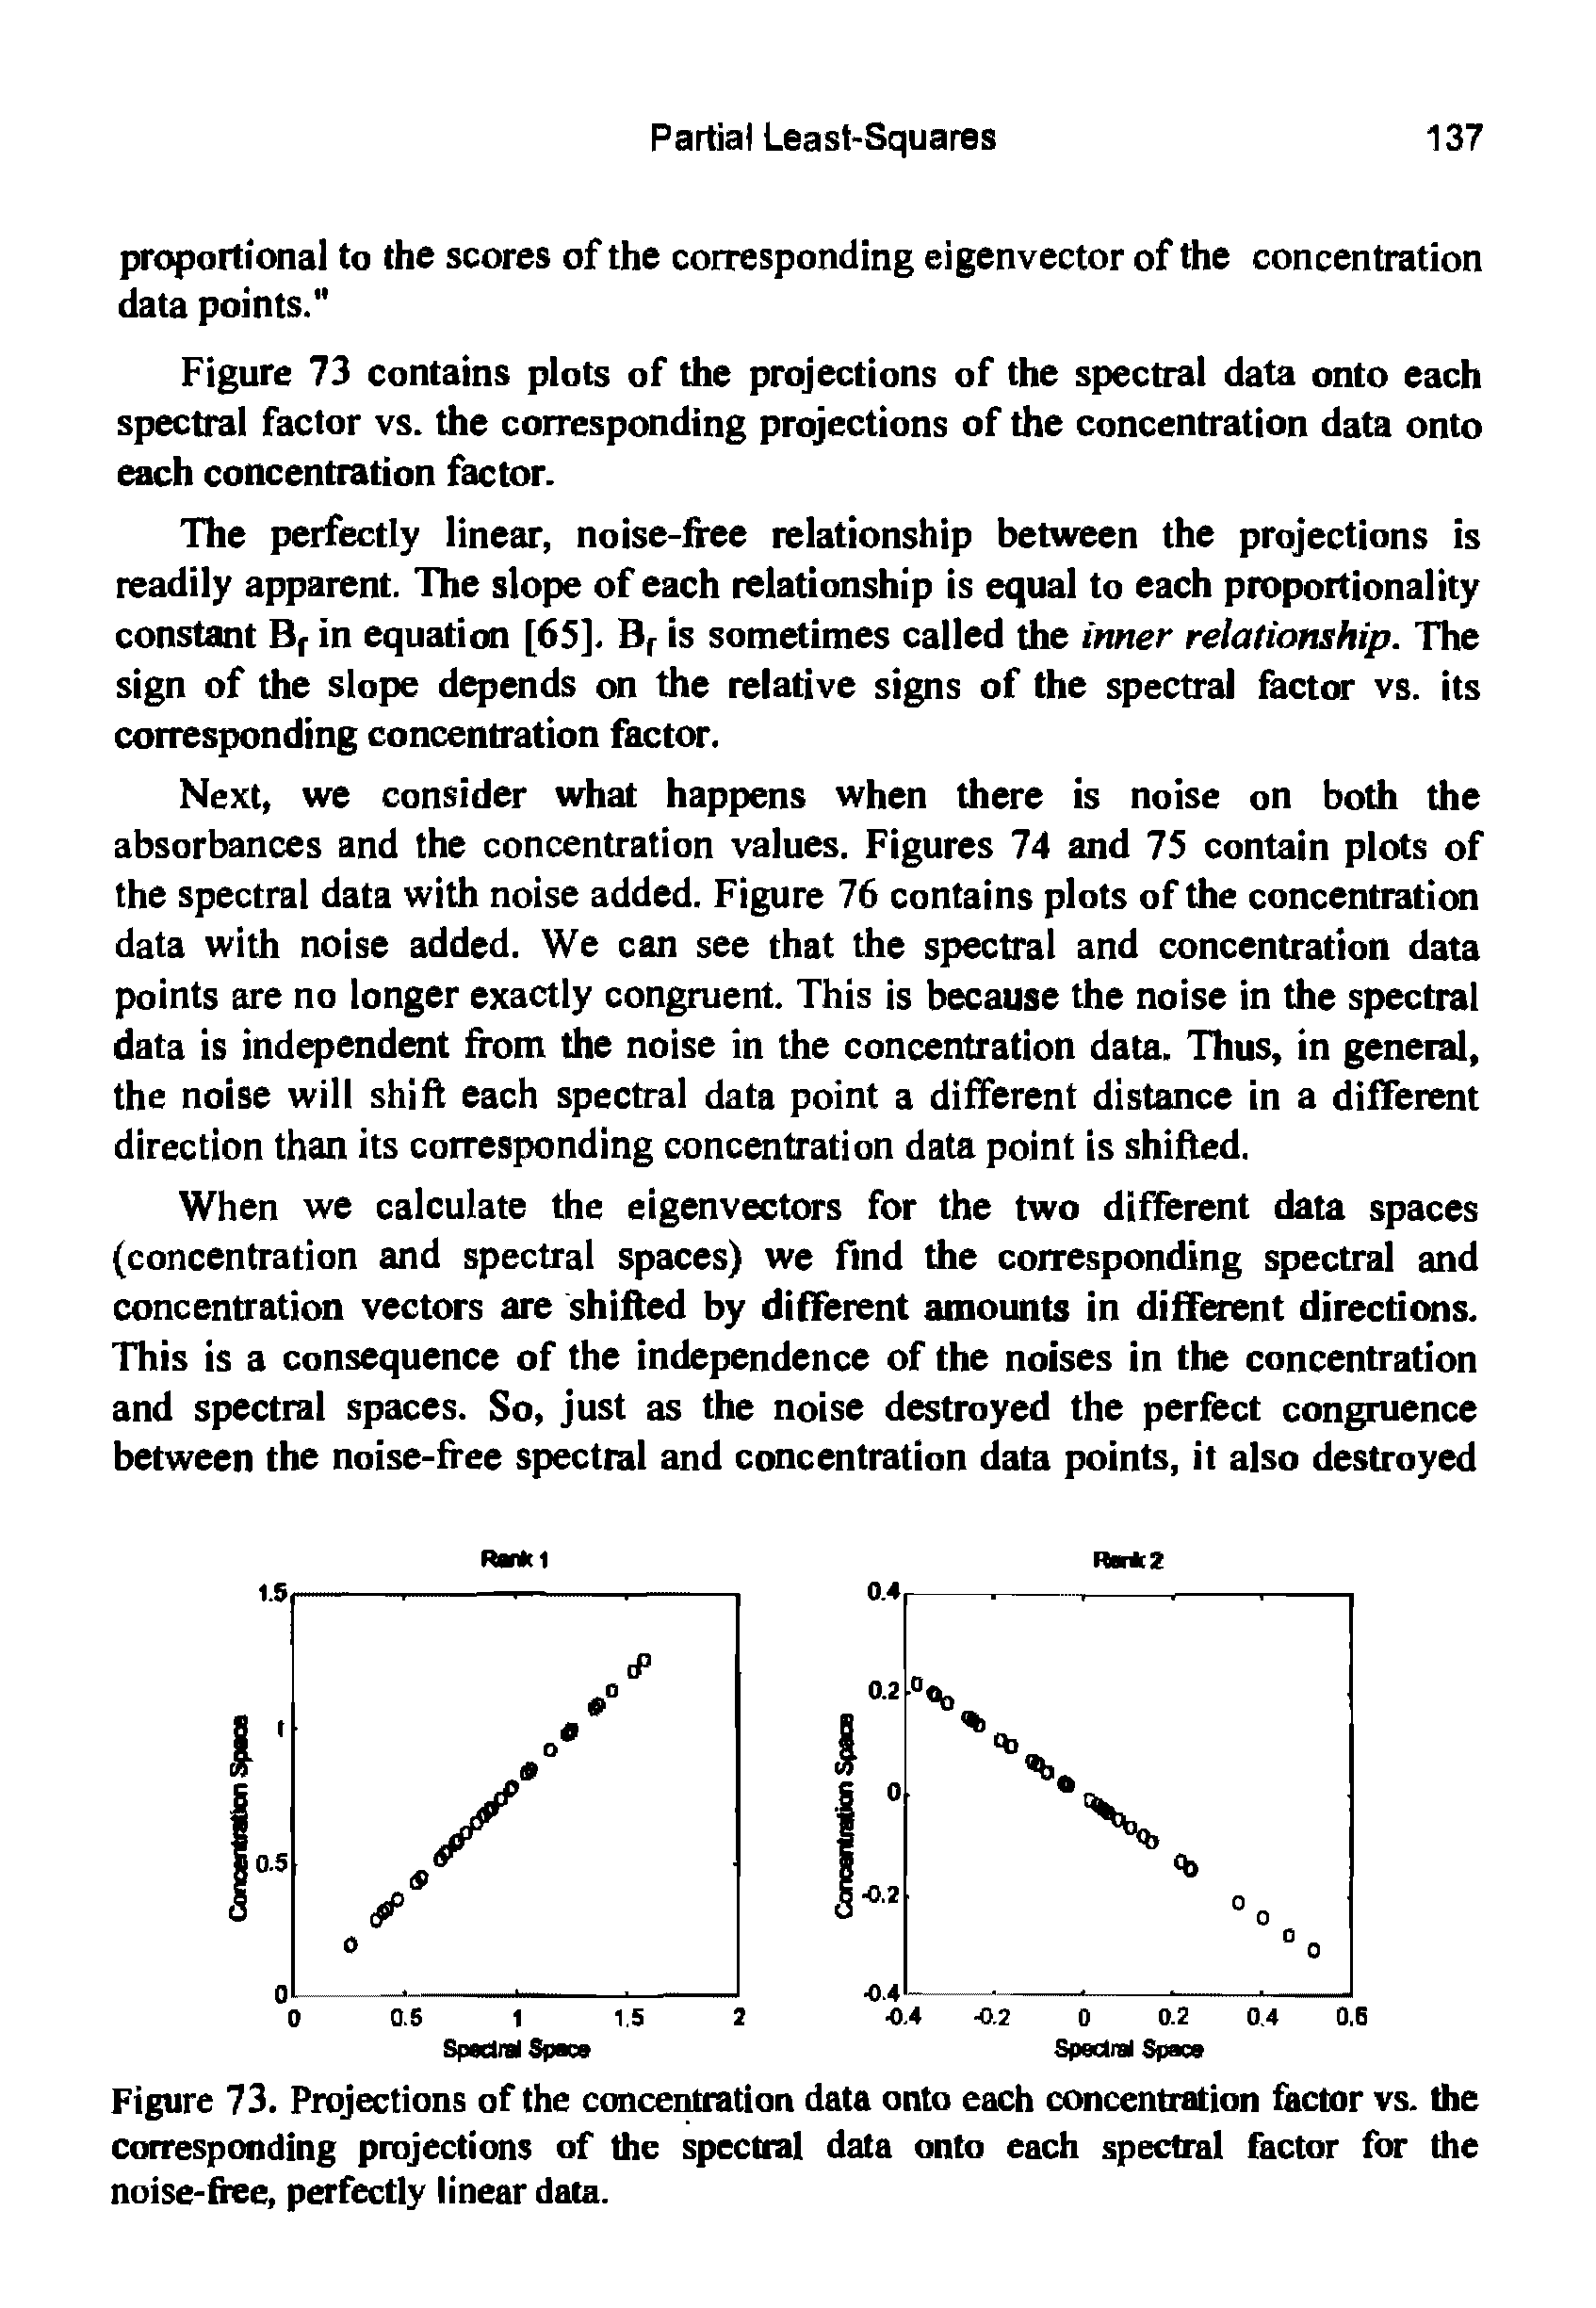 Figure 73. Projections of the concentration data onto each concentration factor vs. the corresponding projections of the spectral data onto each spectral factor for the noise-free, perfectly linear data.